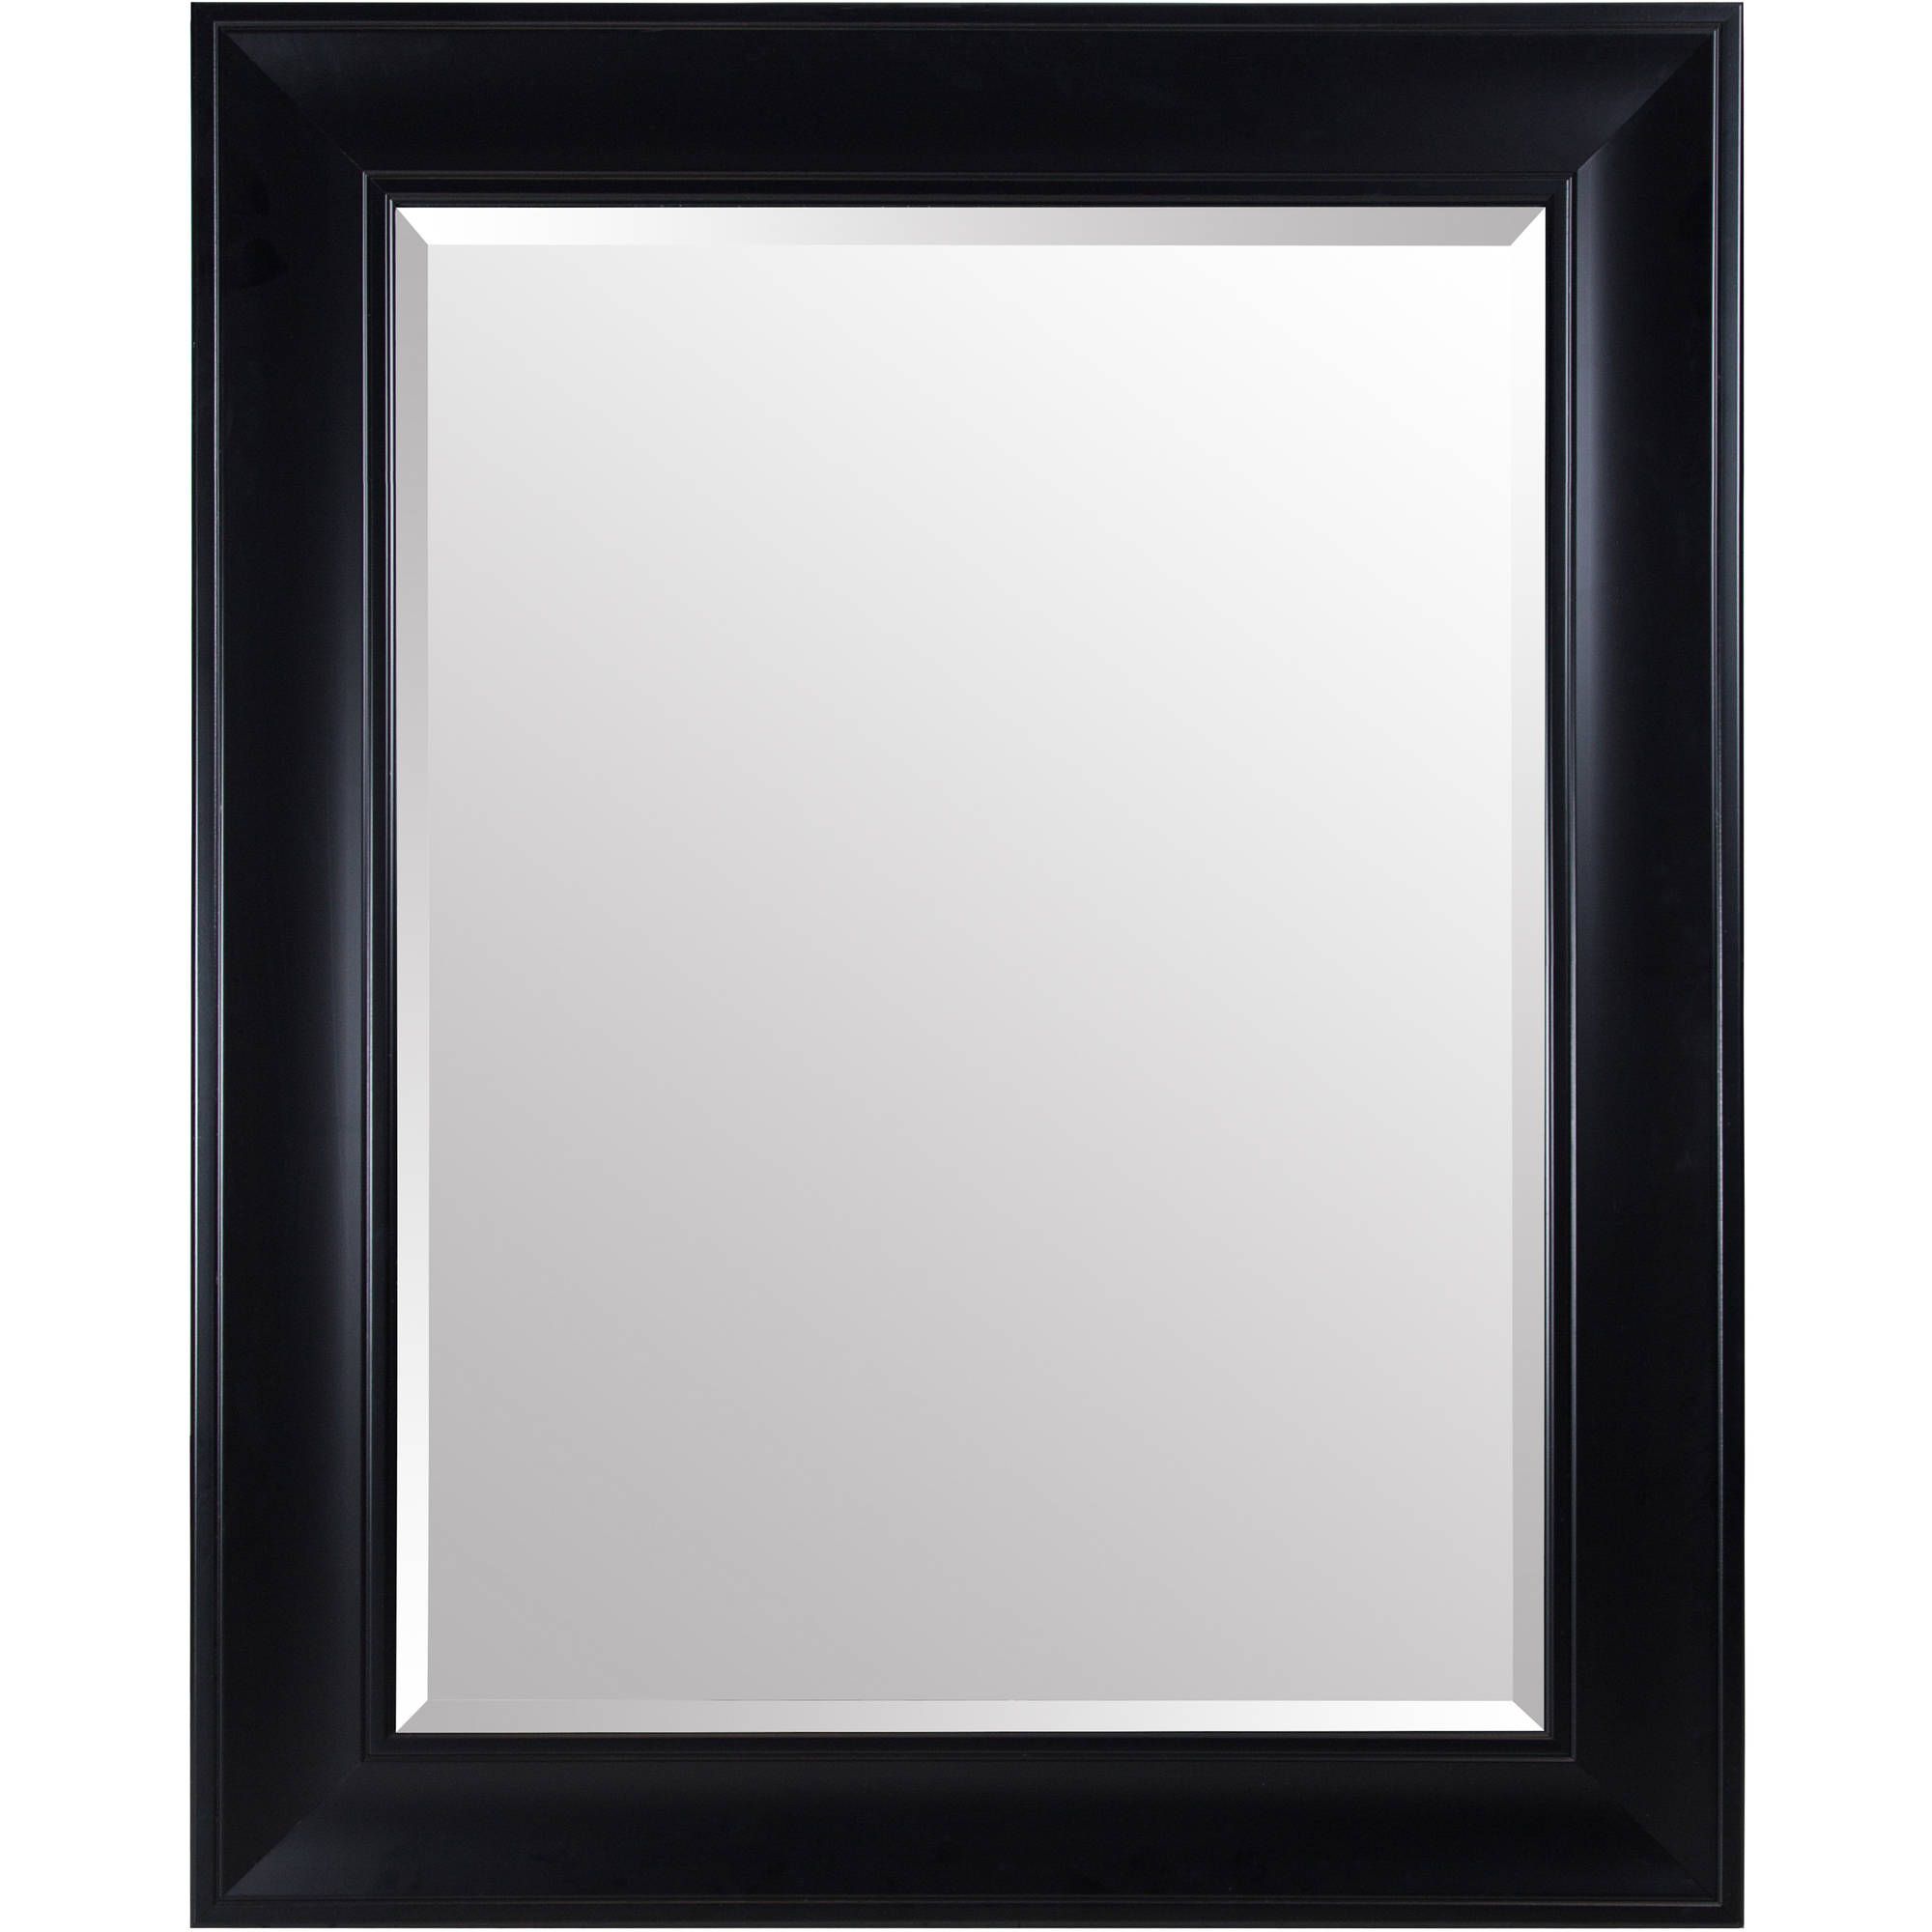 Large Black Framed Wall Mirrors Regarding Recent Gallery Solutions Large 39x49 Beveled Wall Mirror With Black Satin Frame (View 20 of 20)